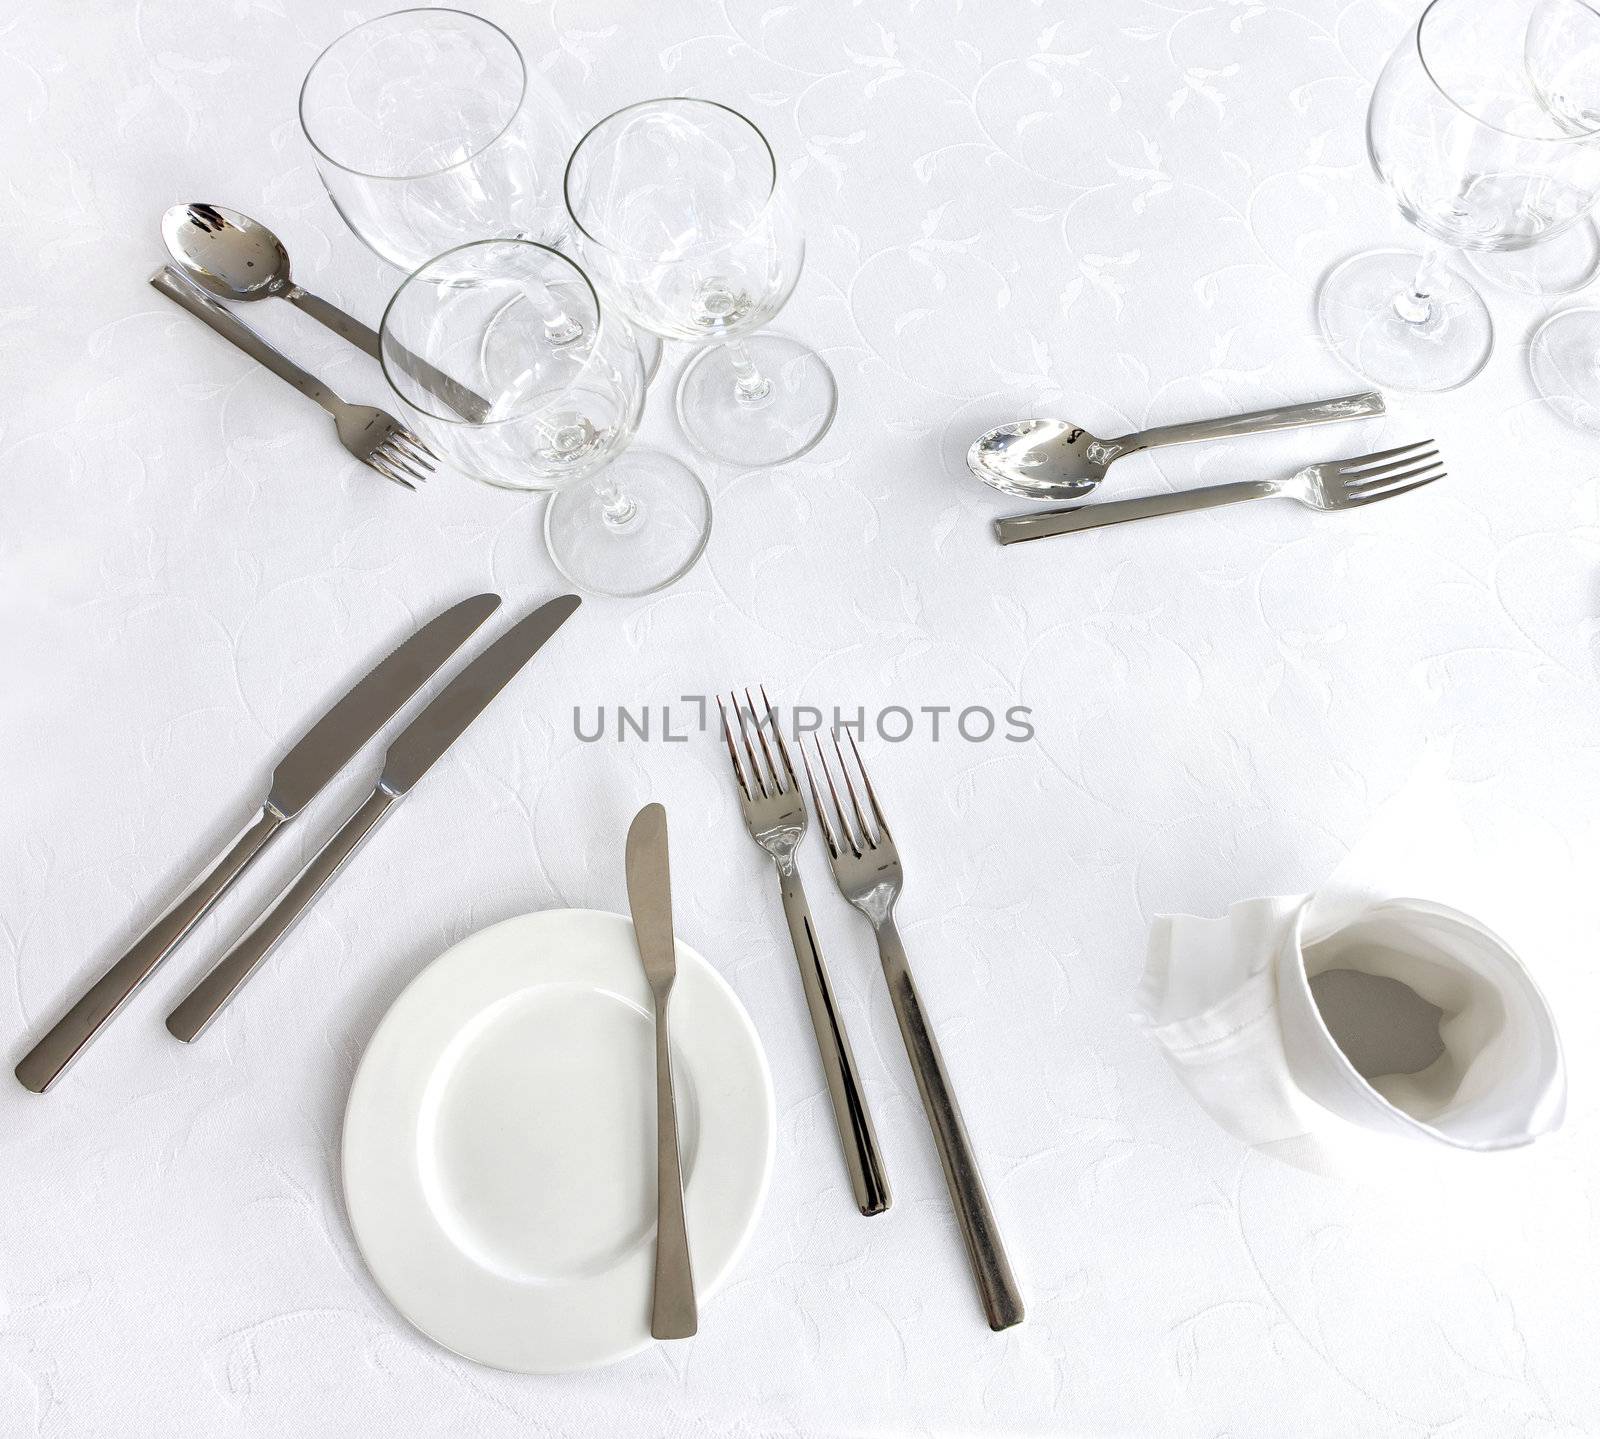 Knife, fork, spoon, plate and glasses on a table